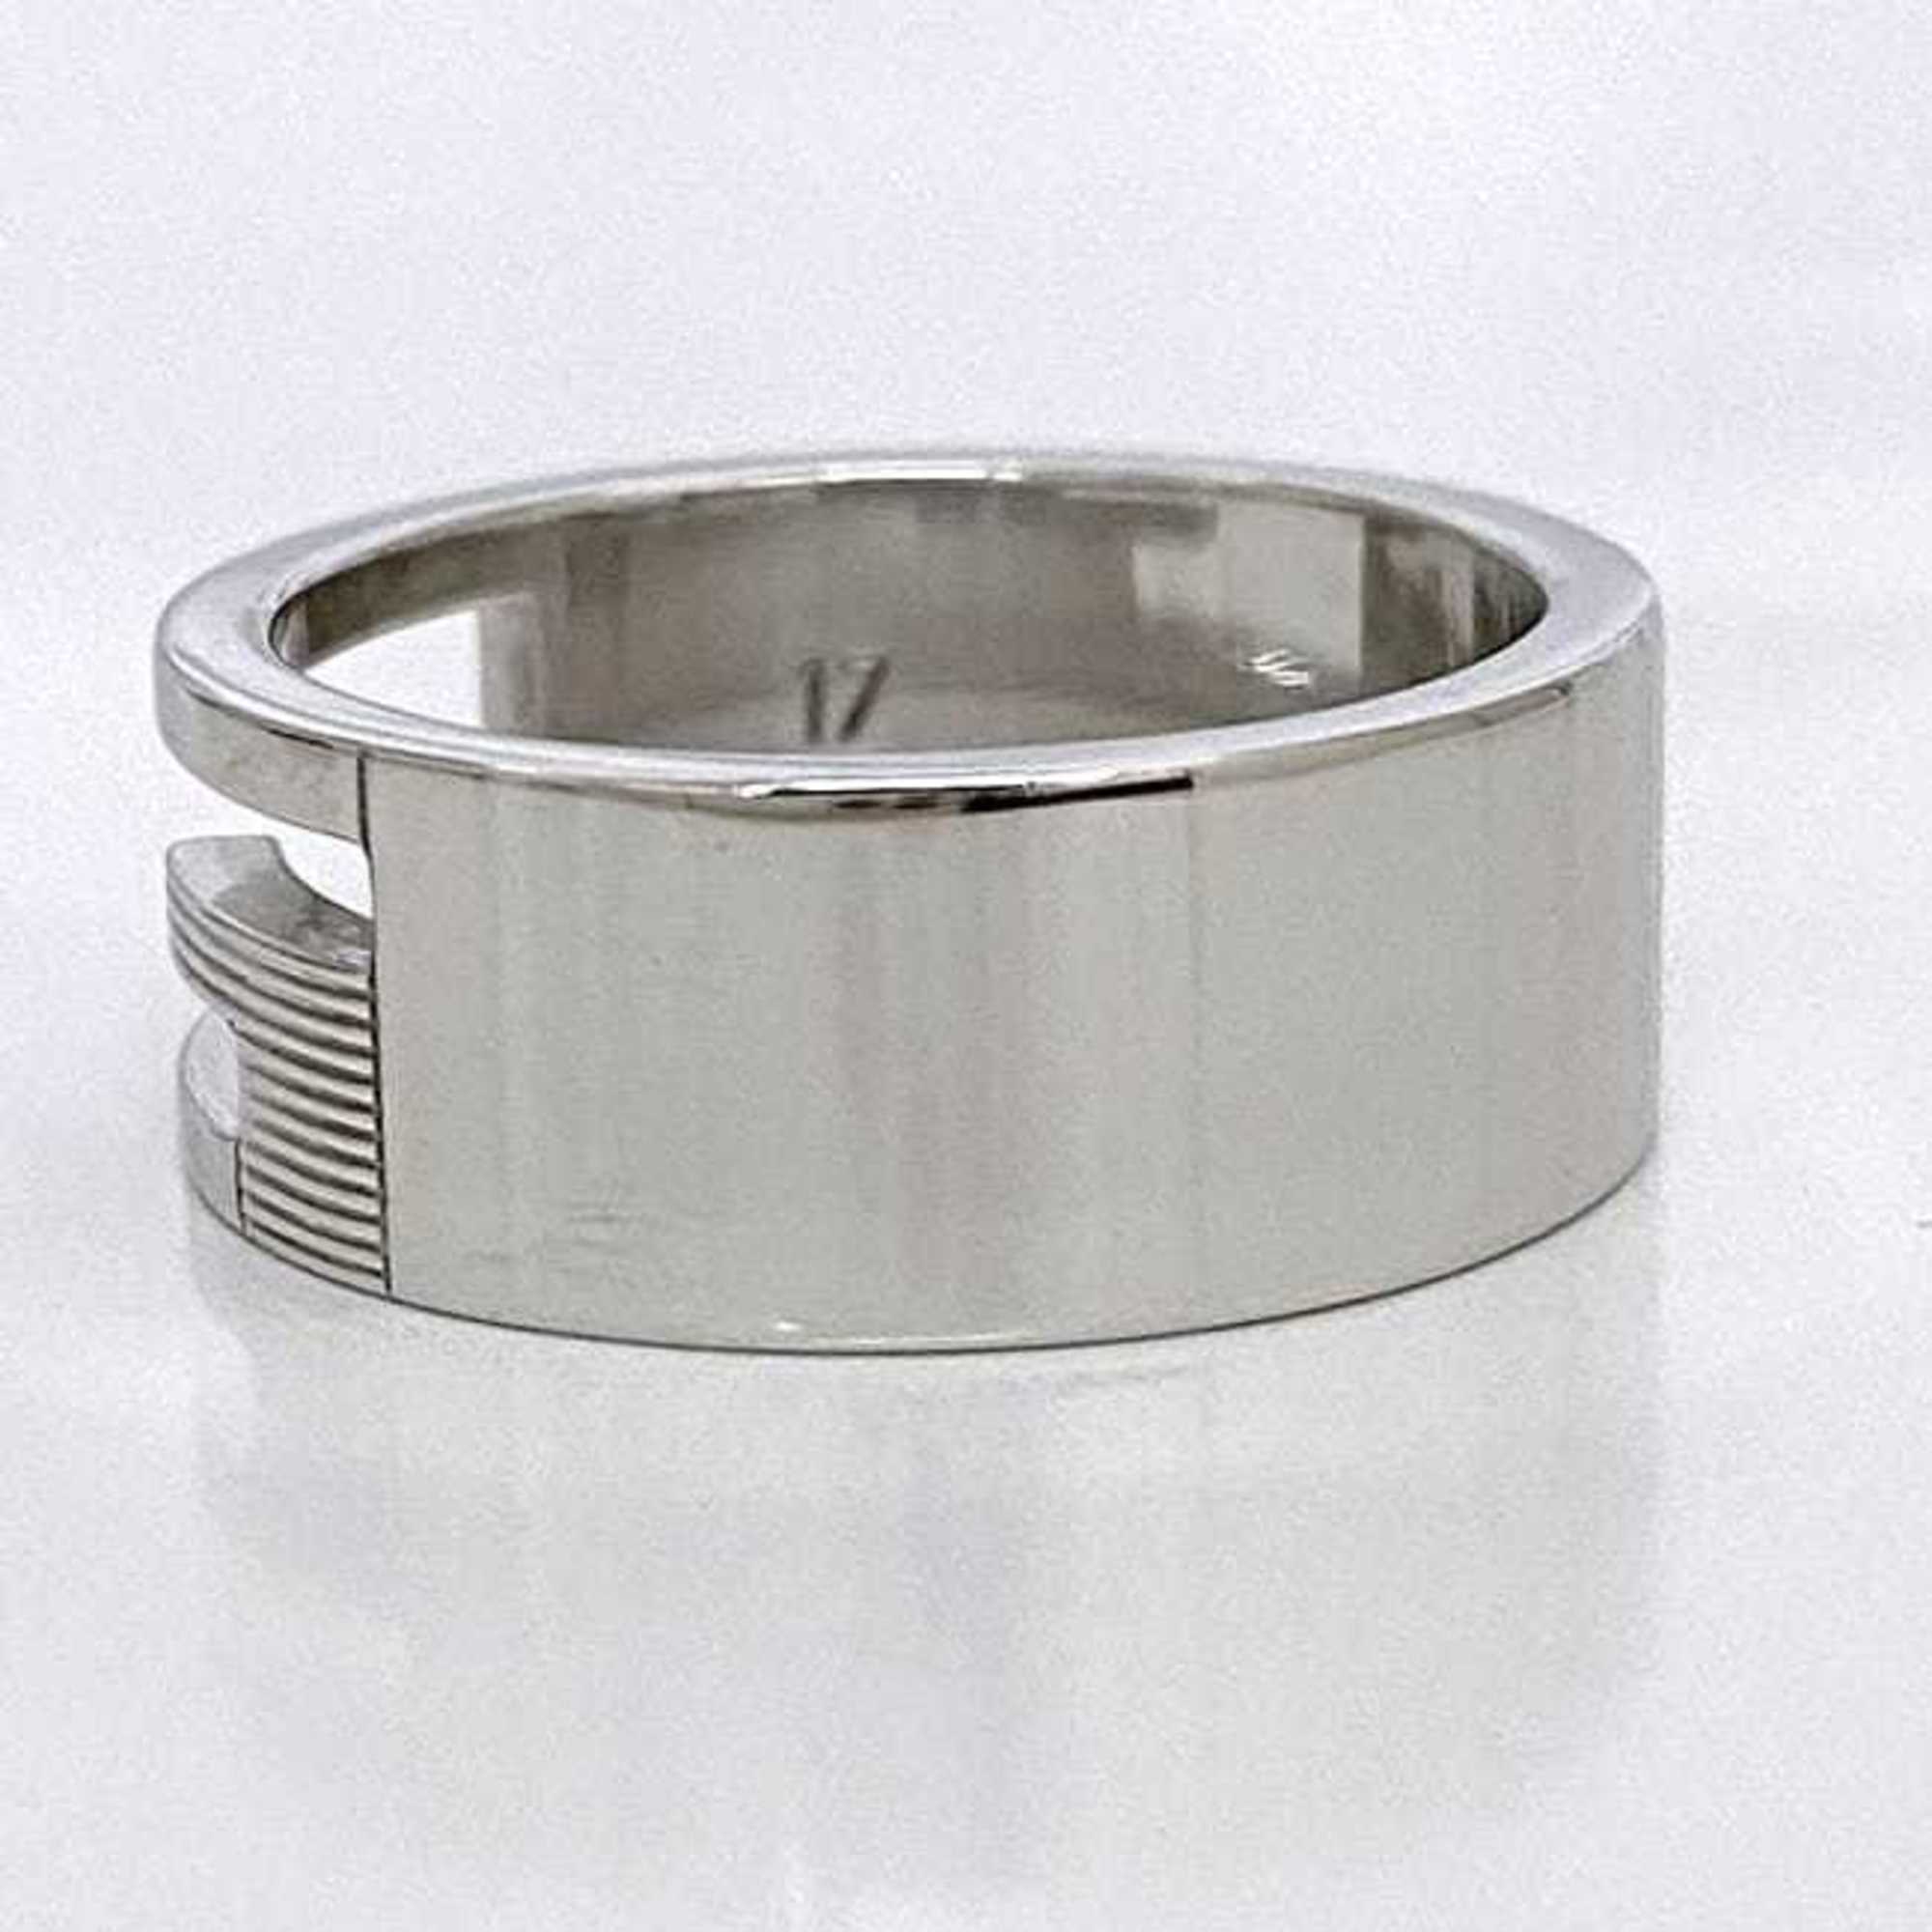 Gucci Branded Ring Silver G Cut 032661 09840 8106 ec-20394 Size 16 Ag 925 SILVER GUCCI